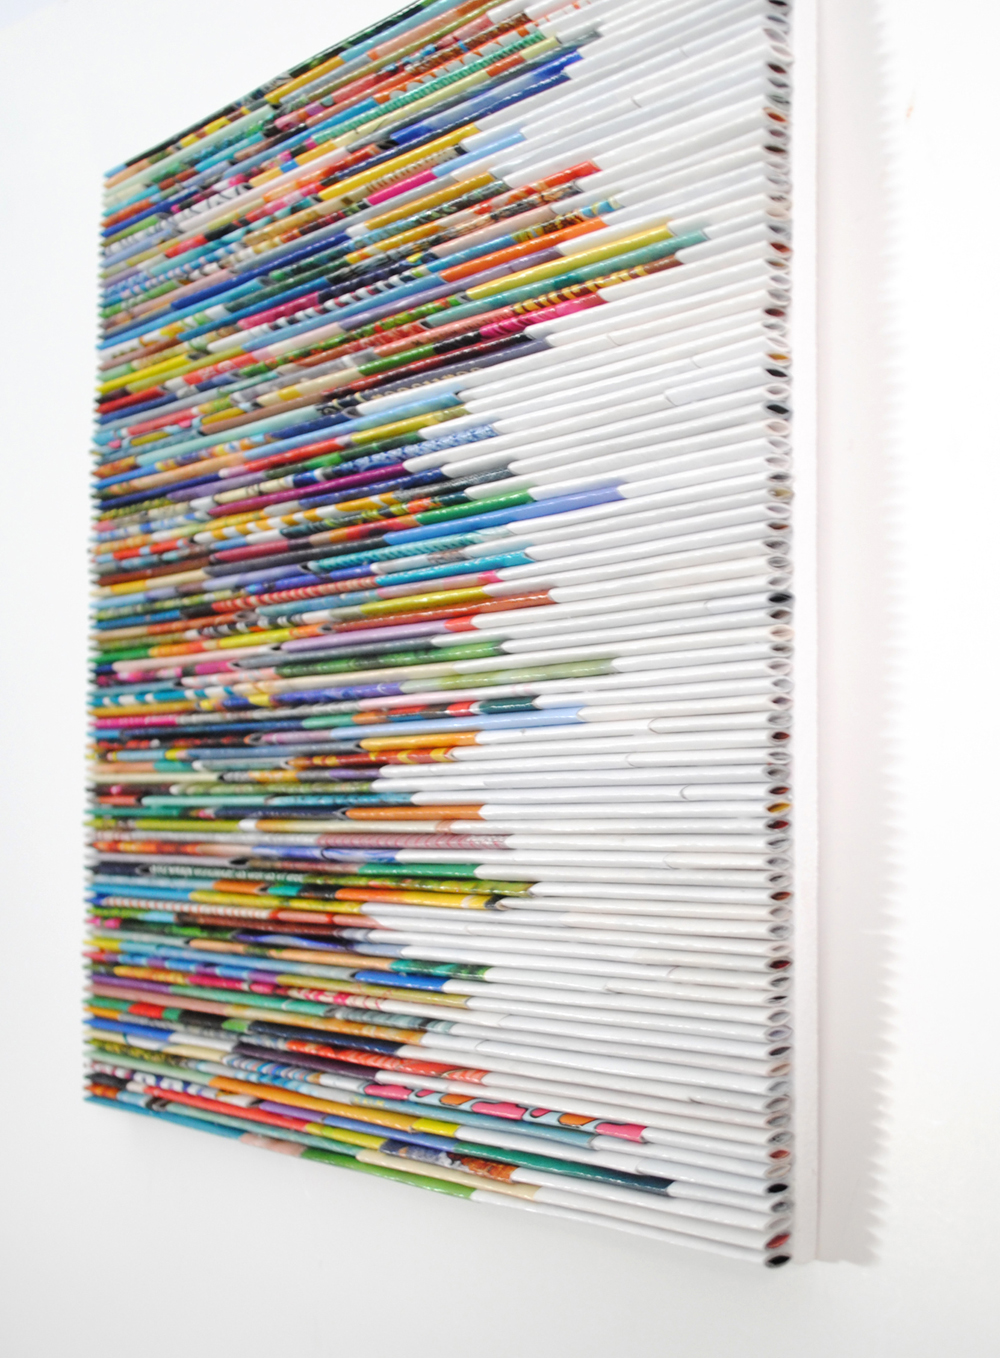 Colourful magazines folded into intricate wall art